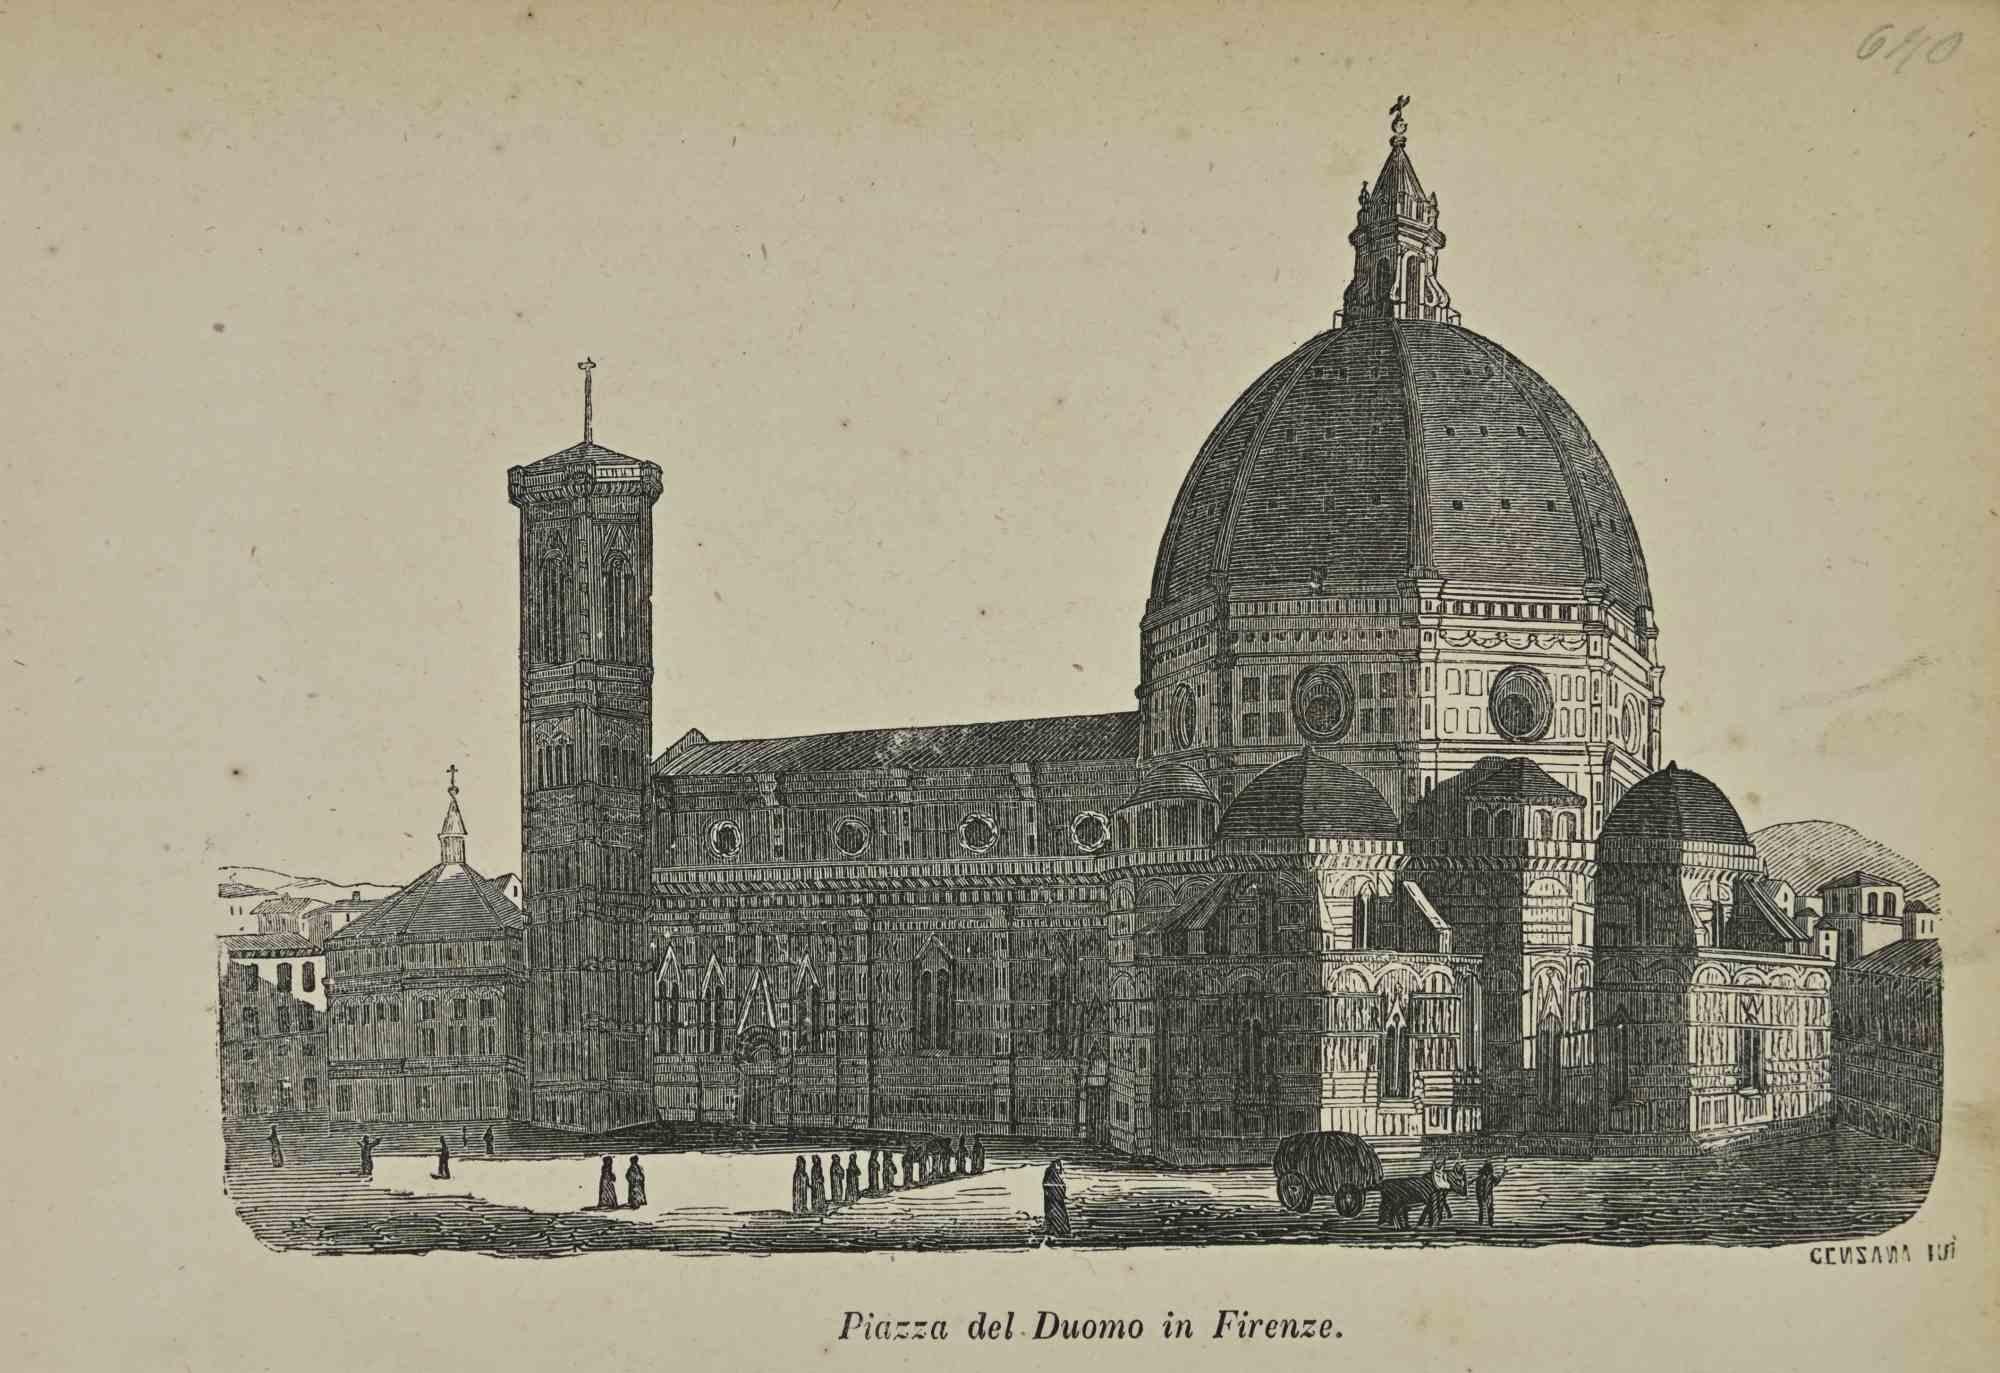 Uses and Customs - Cathedral Square in Florence - Lithograph - 1862